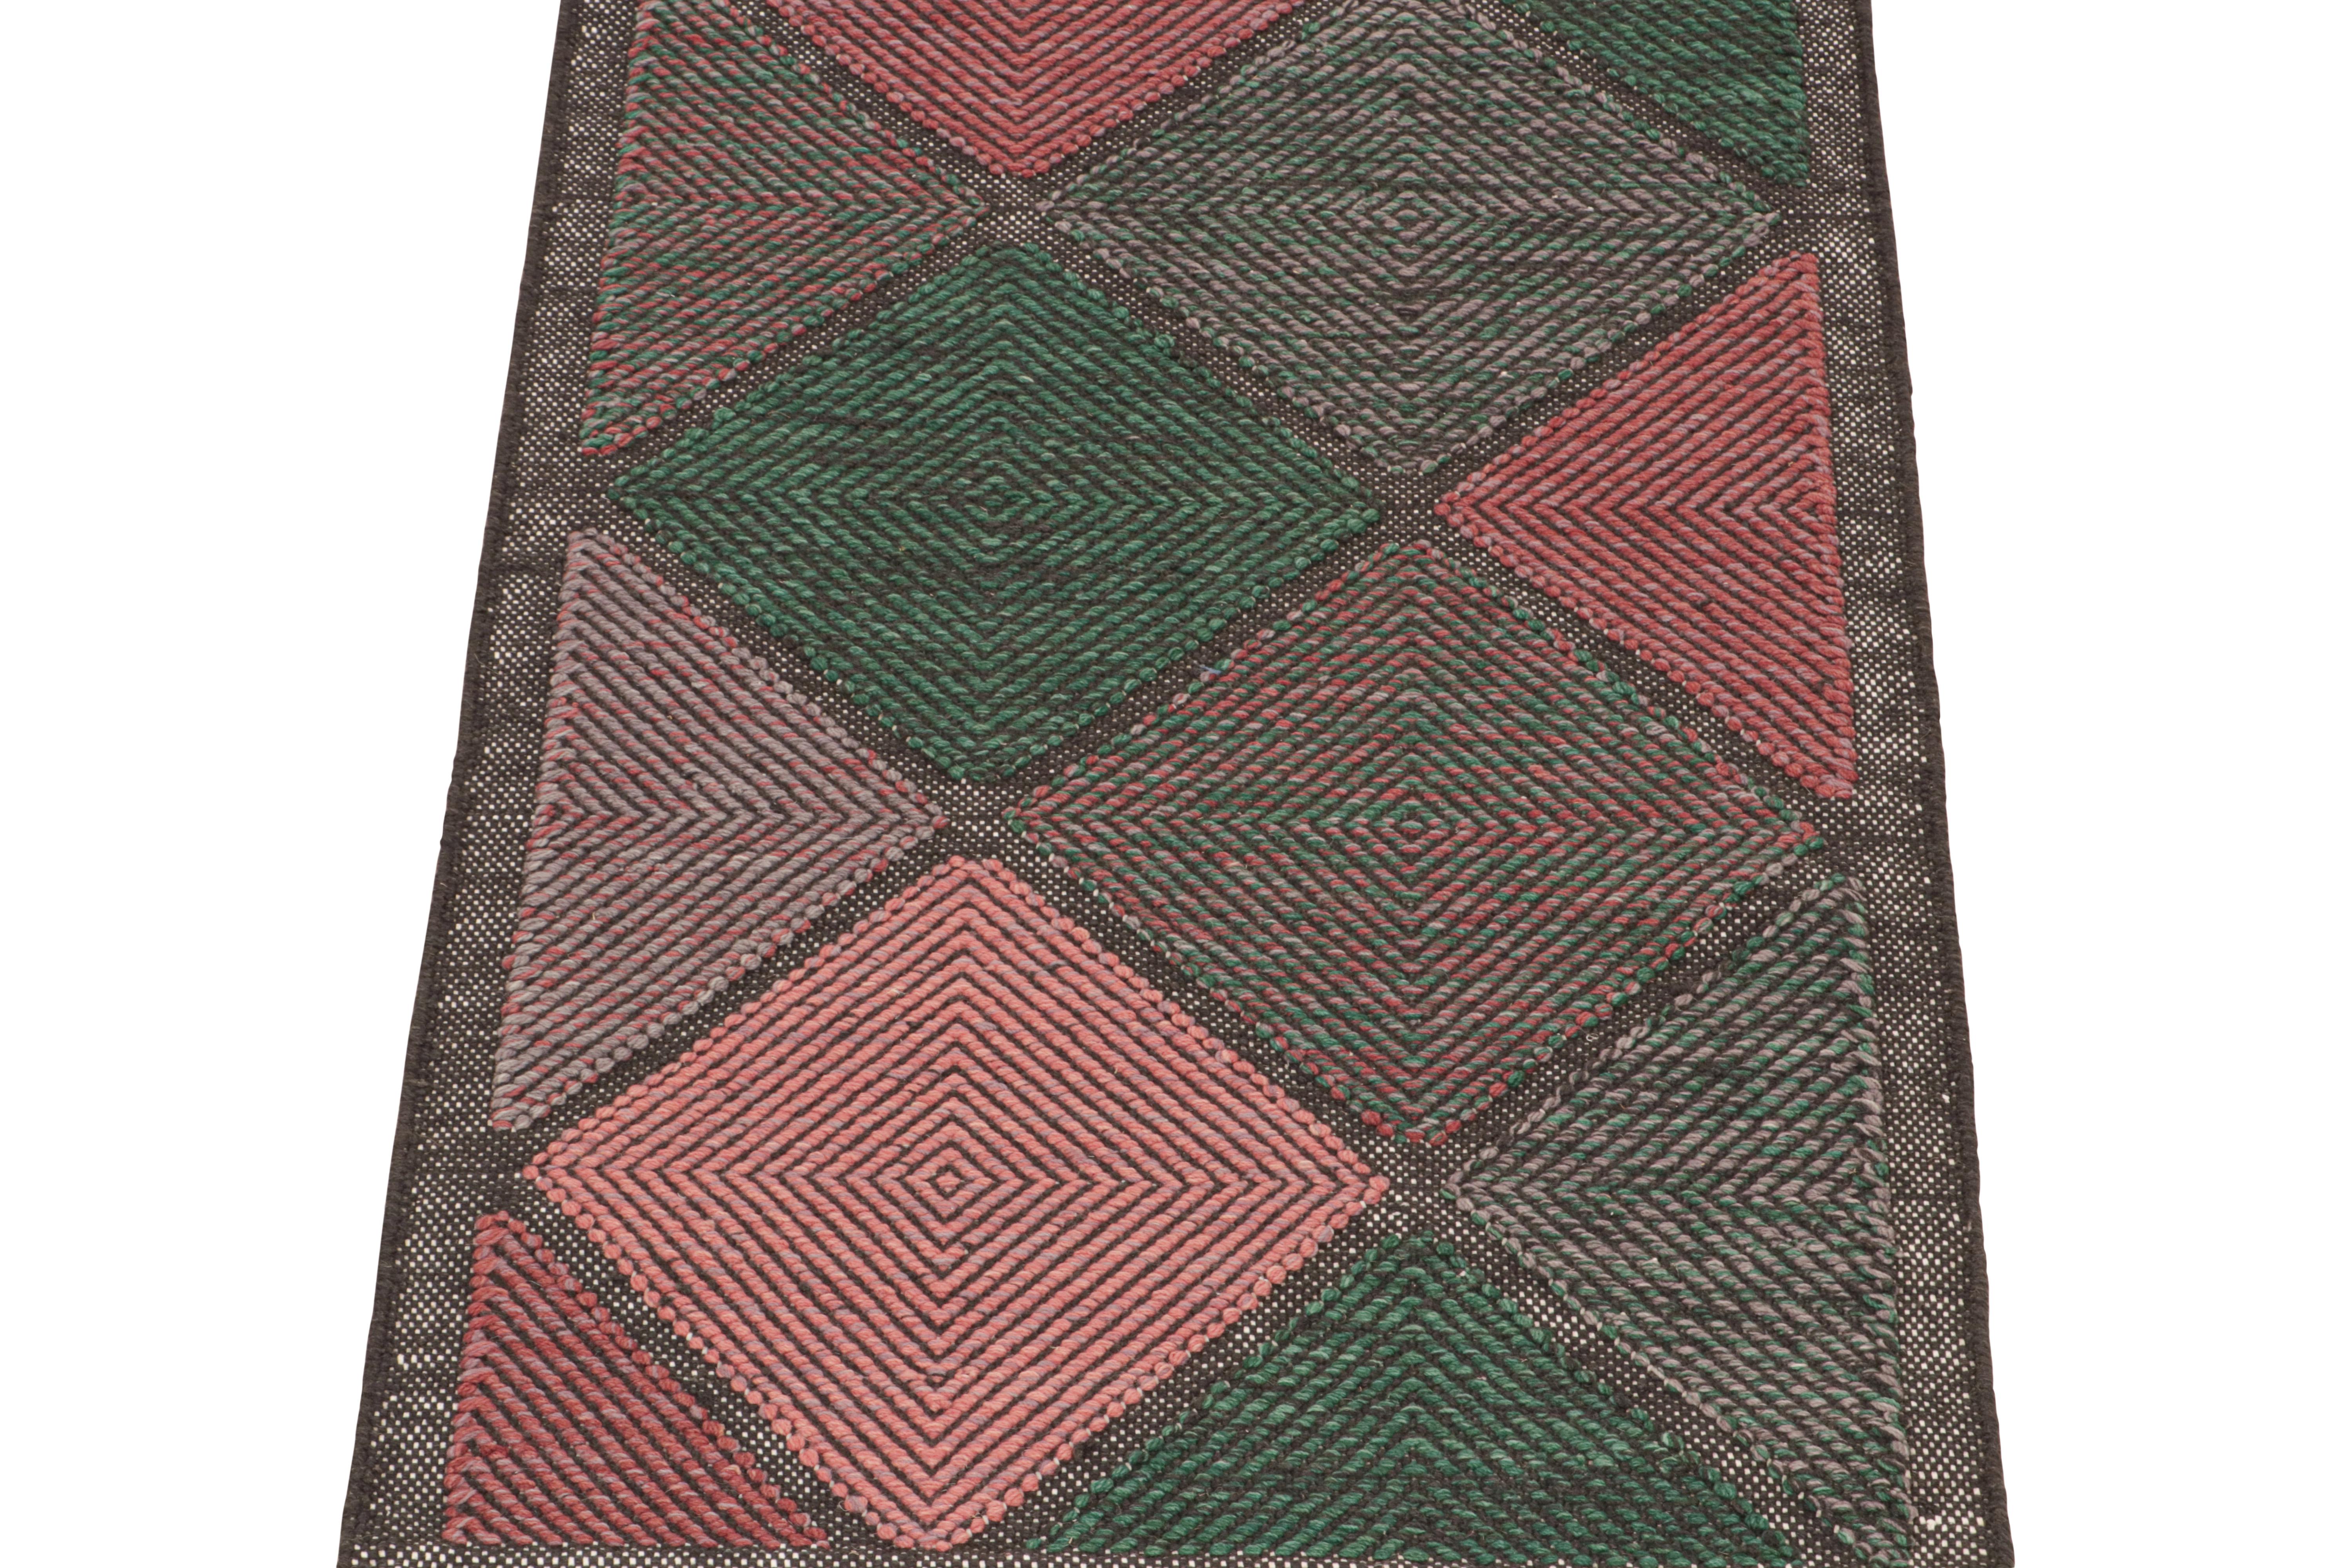 This 3x5 flat weave rug is a new addition to the Scandinavian Kilim collection by Rug & Kilim. Handwoven in wool and natural yarns, its design reflects a contemporary take on mid-century Rollakans and Swedish Deco style.

On the Design:

This